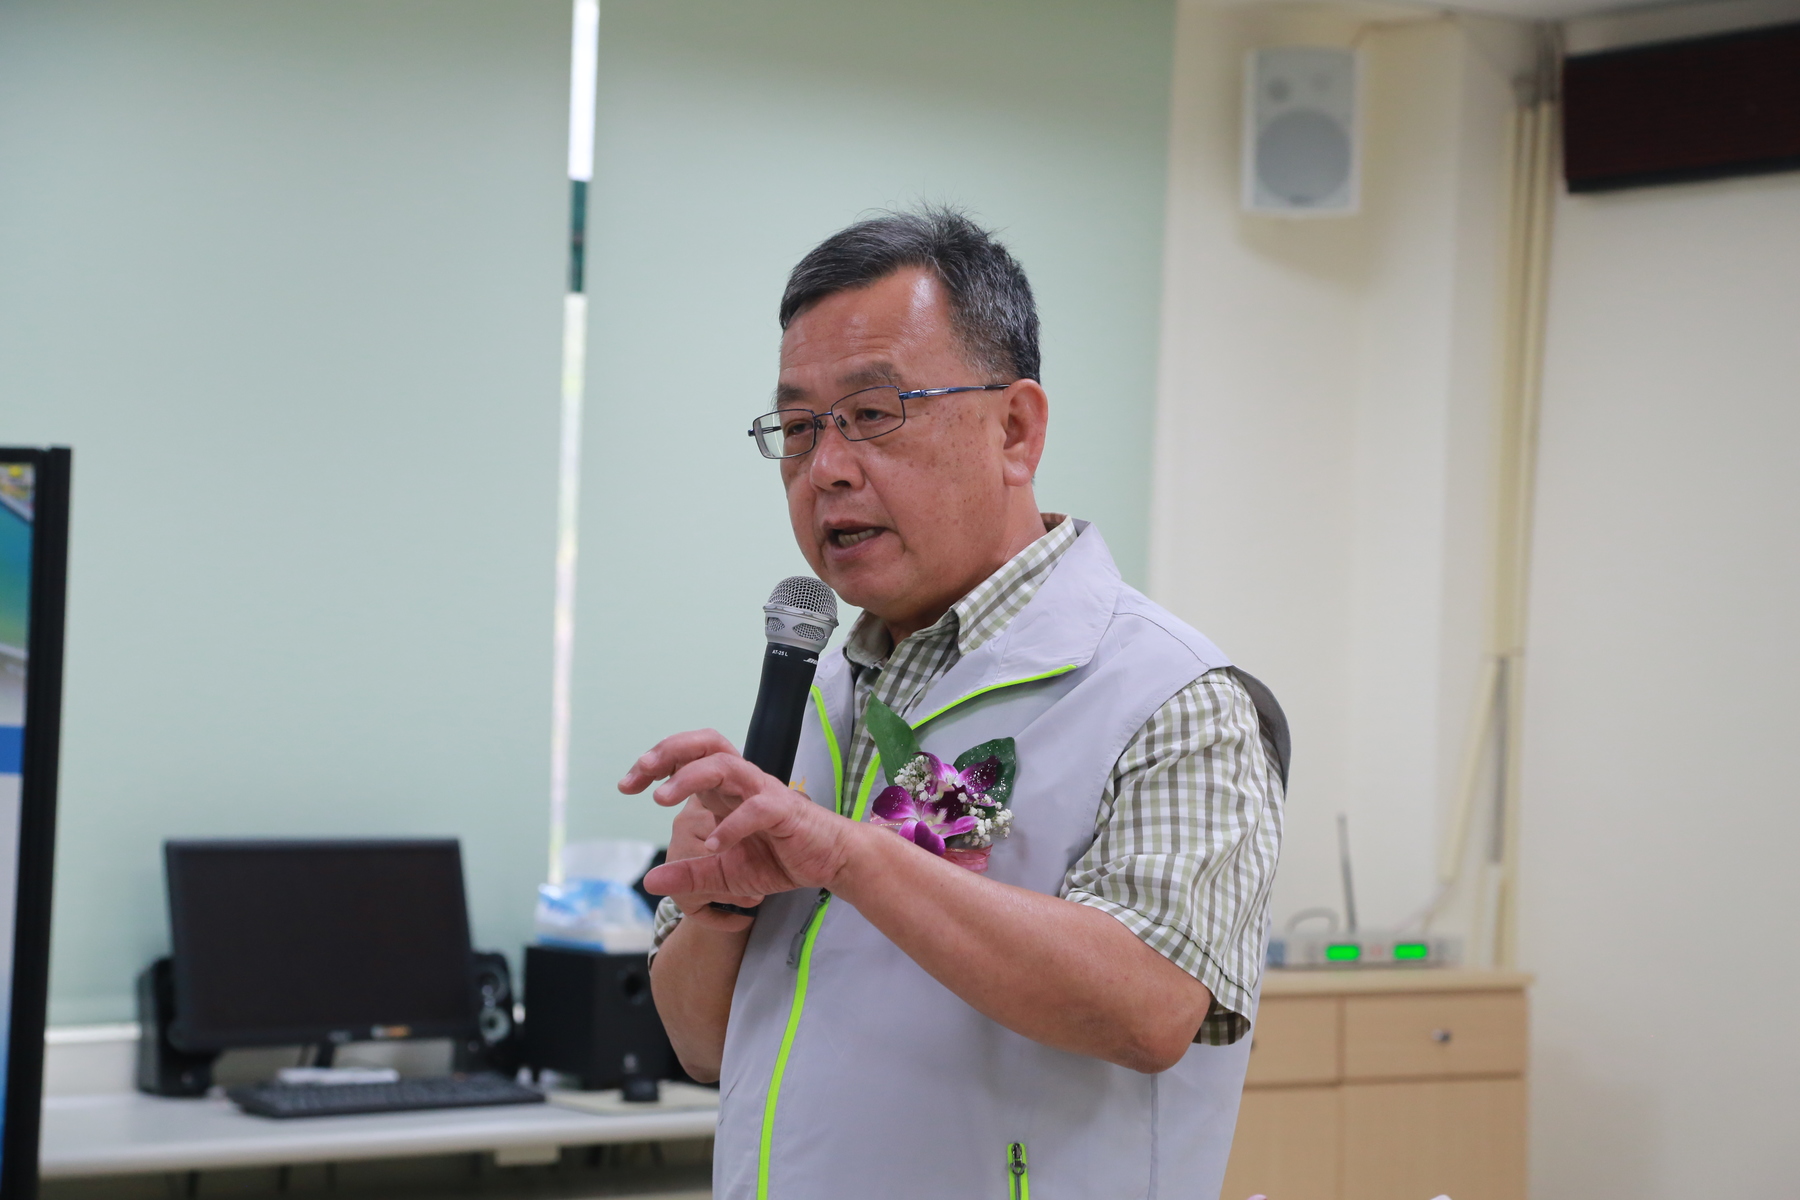 In his speech, Penghu County Mayor Feng-Wei Lai said that NSYSU has been cultivating talents from Penghu County – about 300 people until now and that he views optimistically the project of NSYSU’s College of Medicine, which will train healthcare professionals thanks to its R&D capacity.